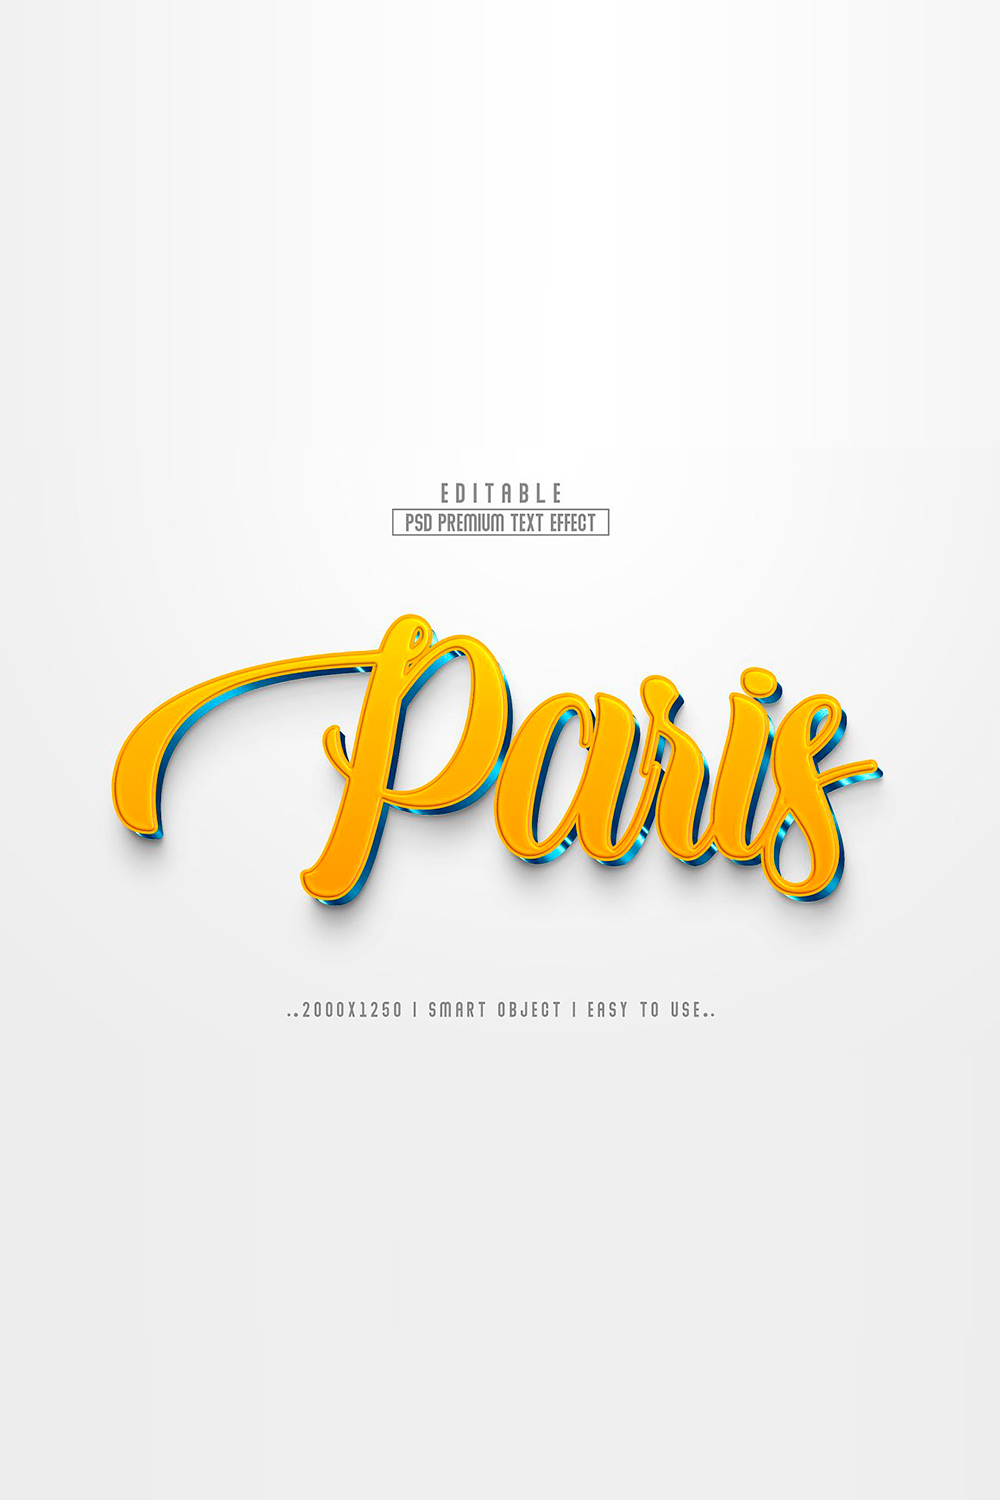 A white background with a yellow and blue lettering that says paris.